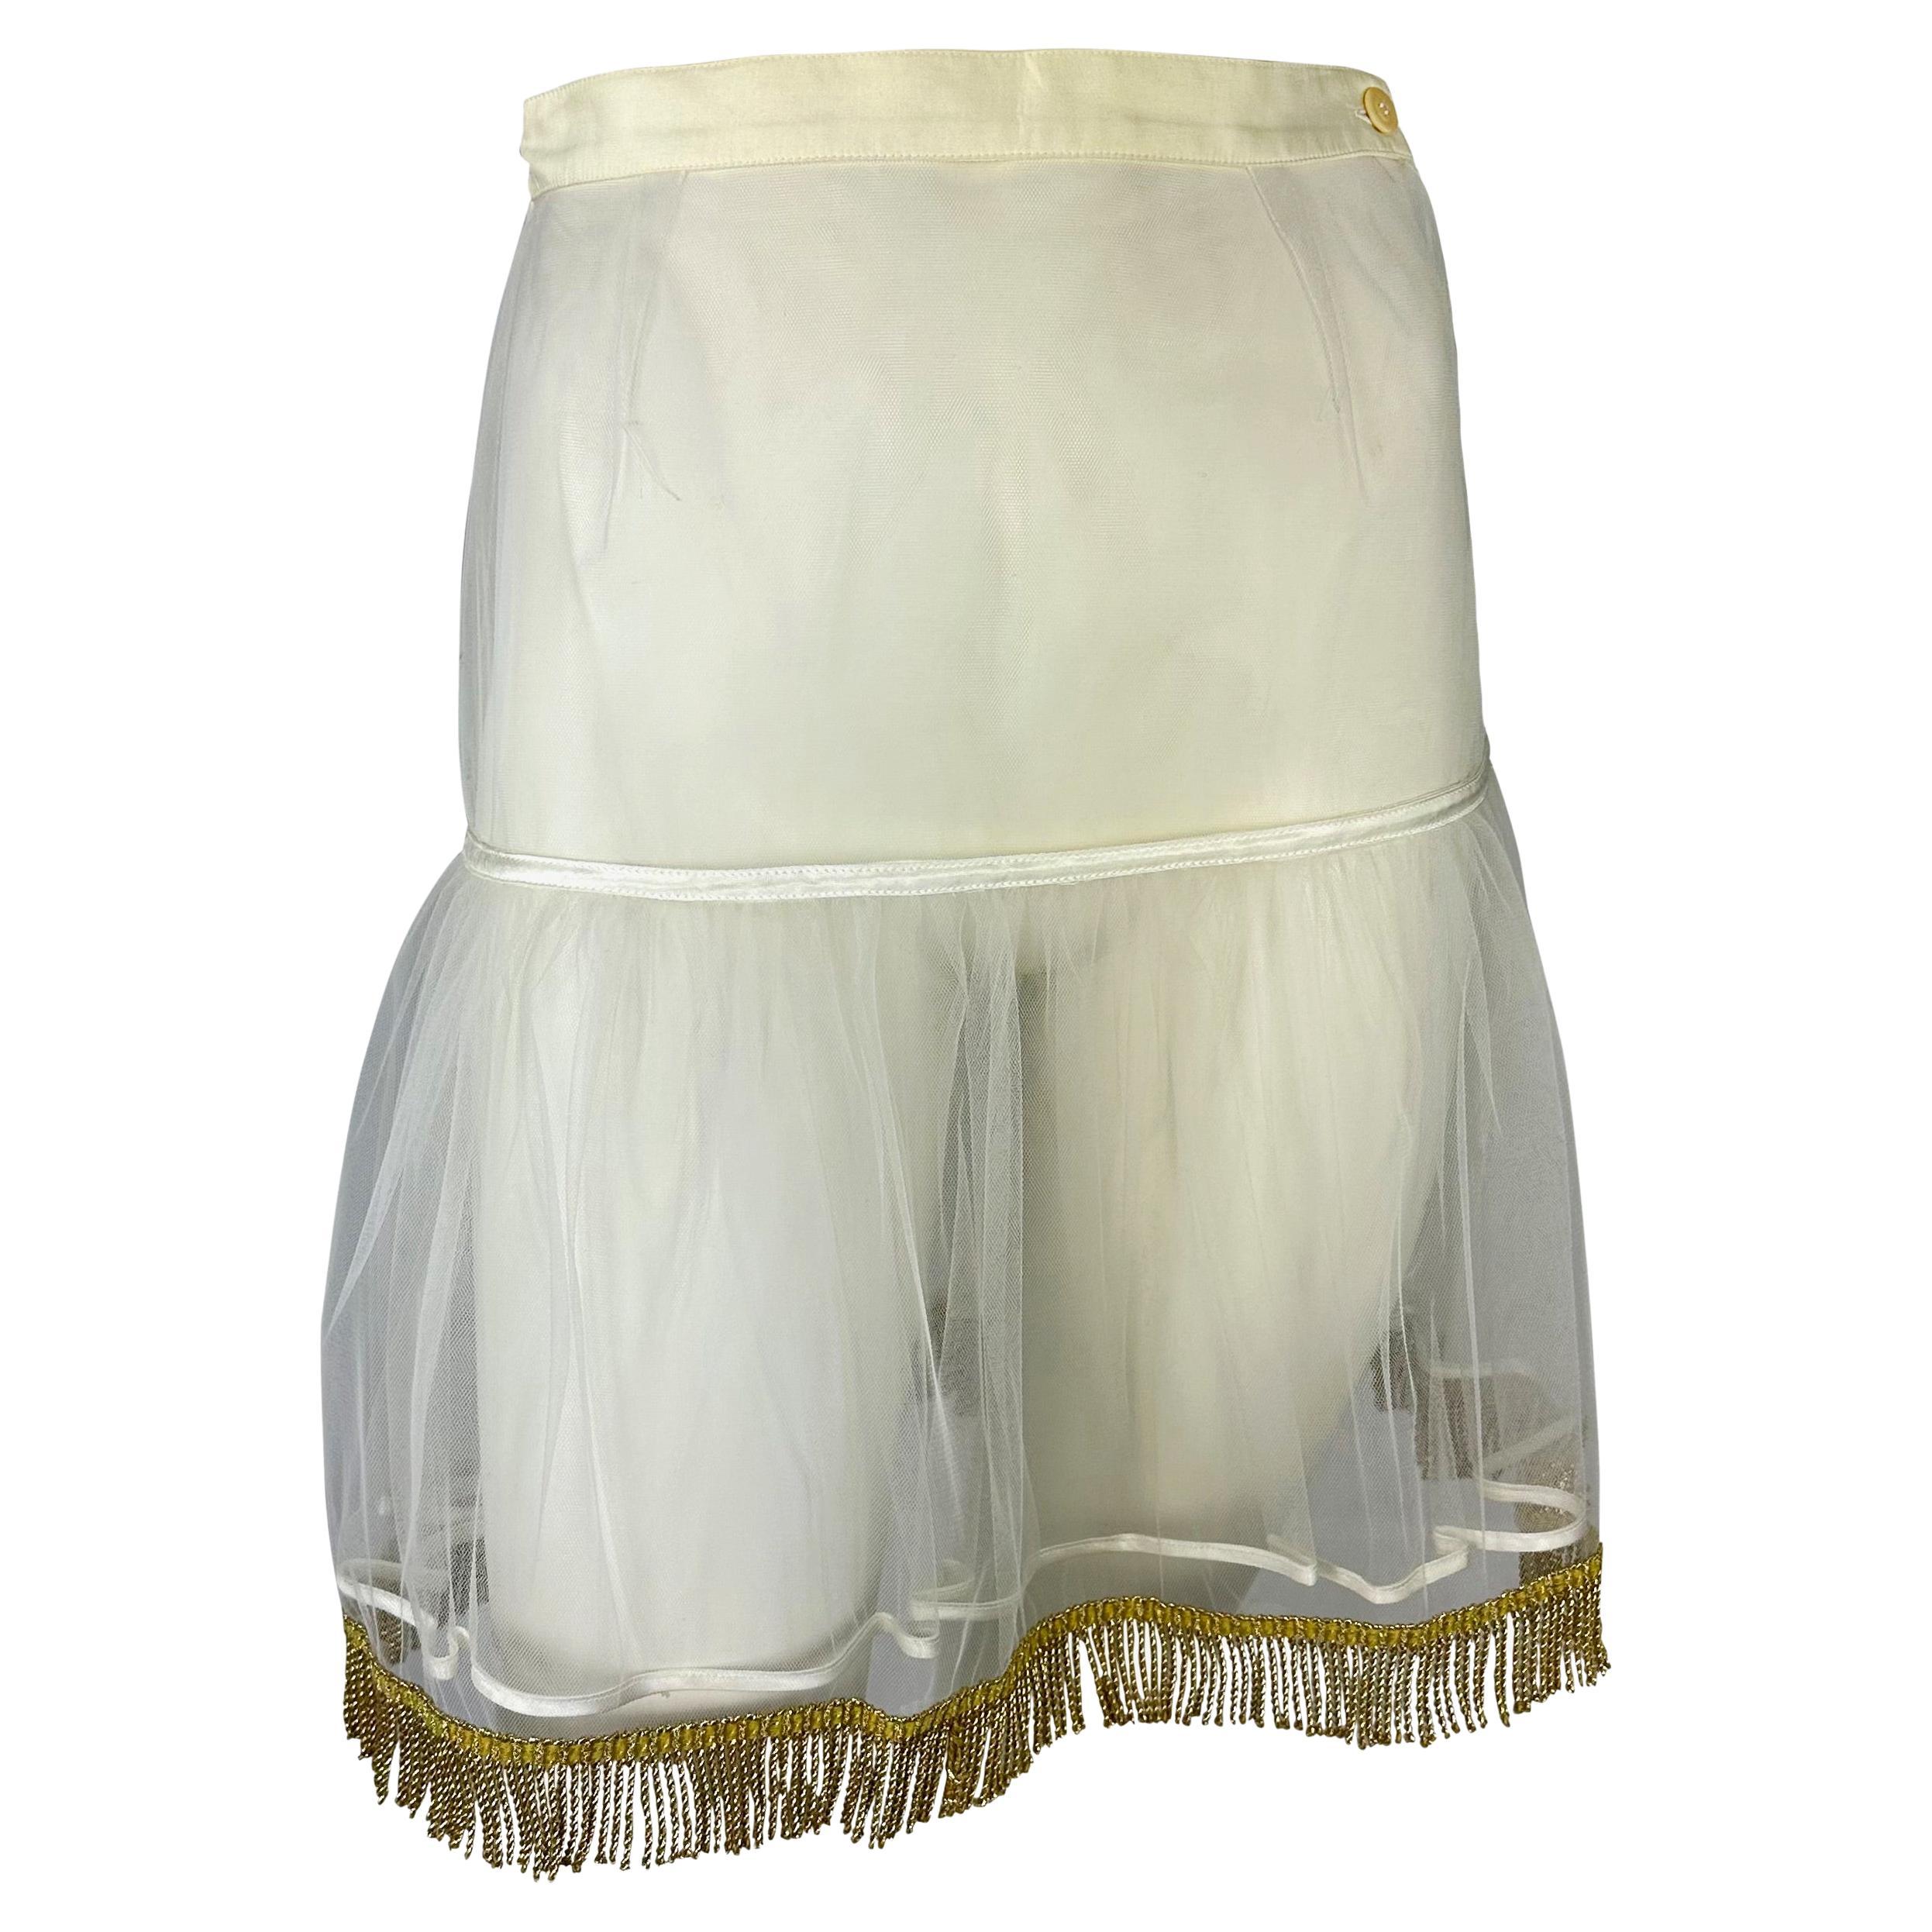 Presenting a rare skirt with its matching crinoline / petticoat underskirt designed by Gianni Versace for his Spring/Summer 1992 collection. This collection is remembered for. solidifying baroque and classical design elements are core to the house